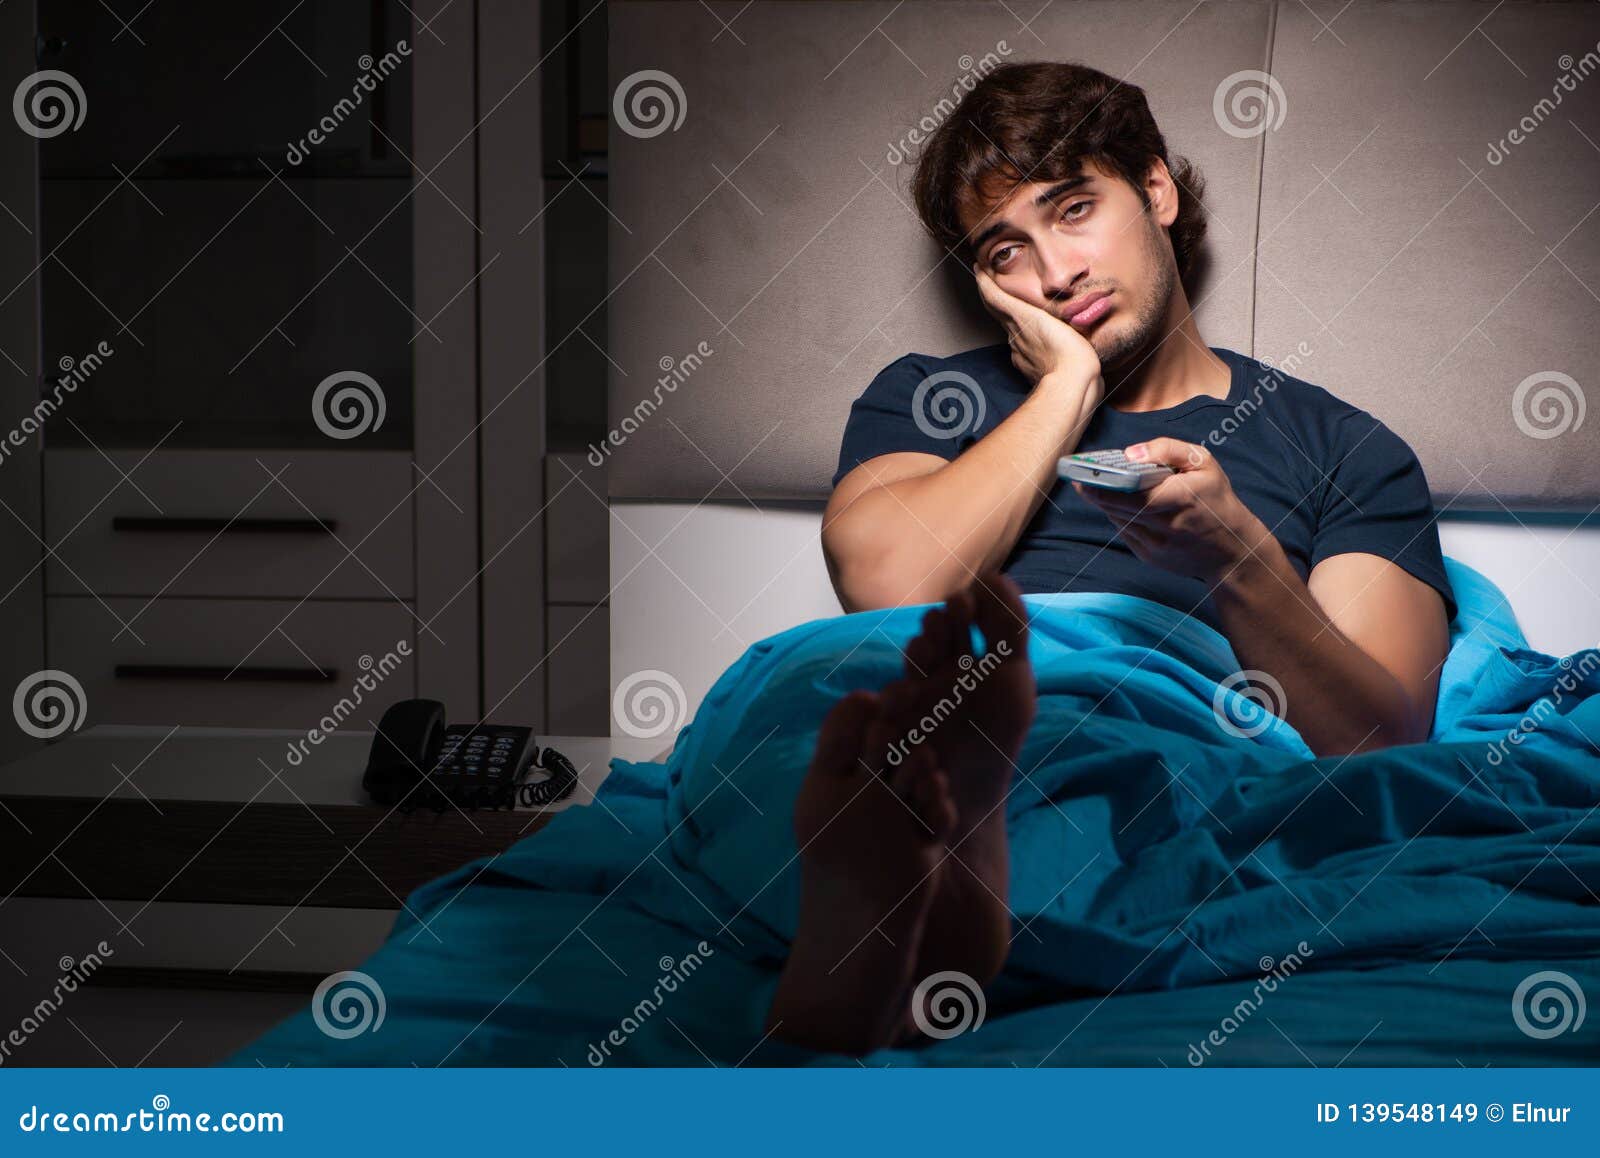 The Man  Watching  Tv  At Night  In Bed Stock Image Image of 